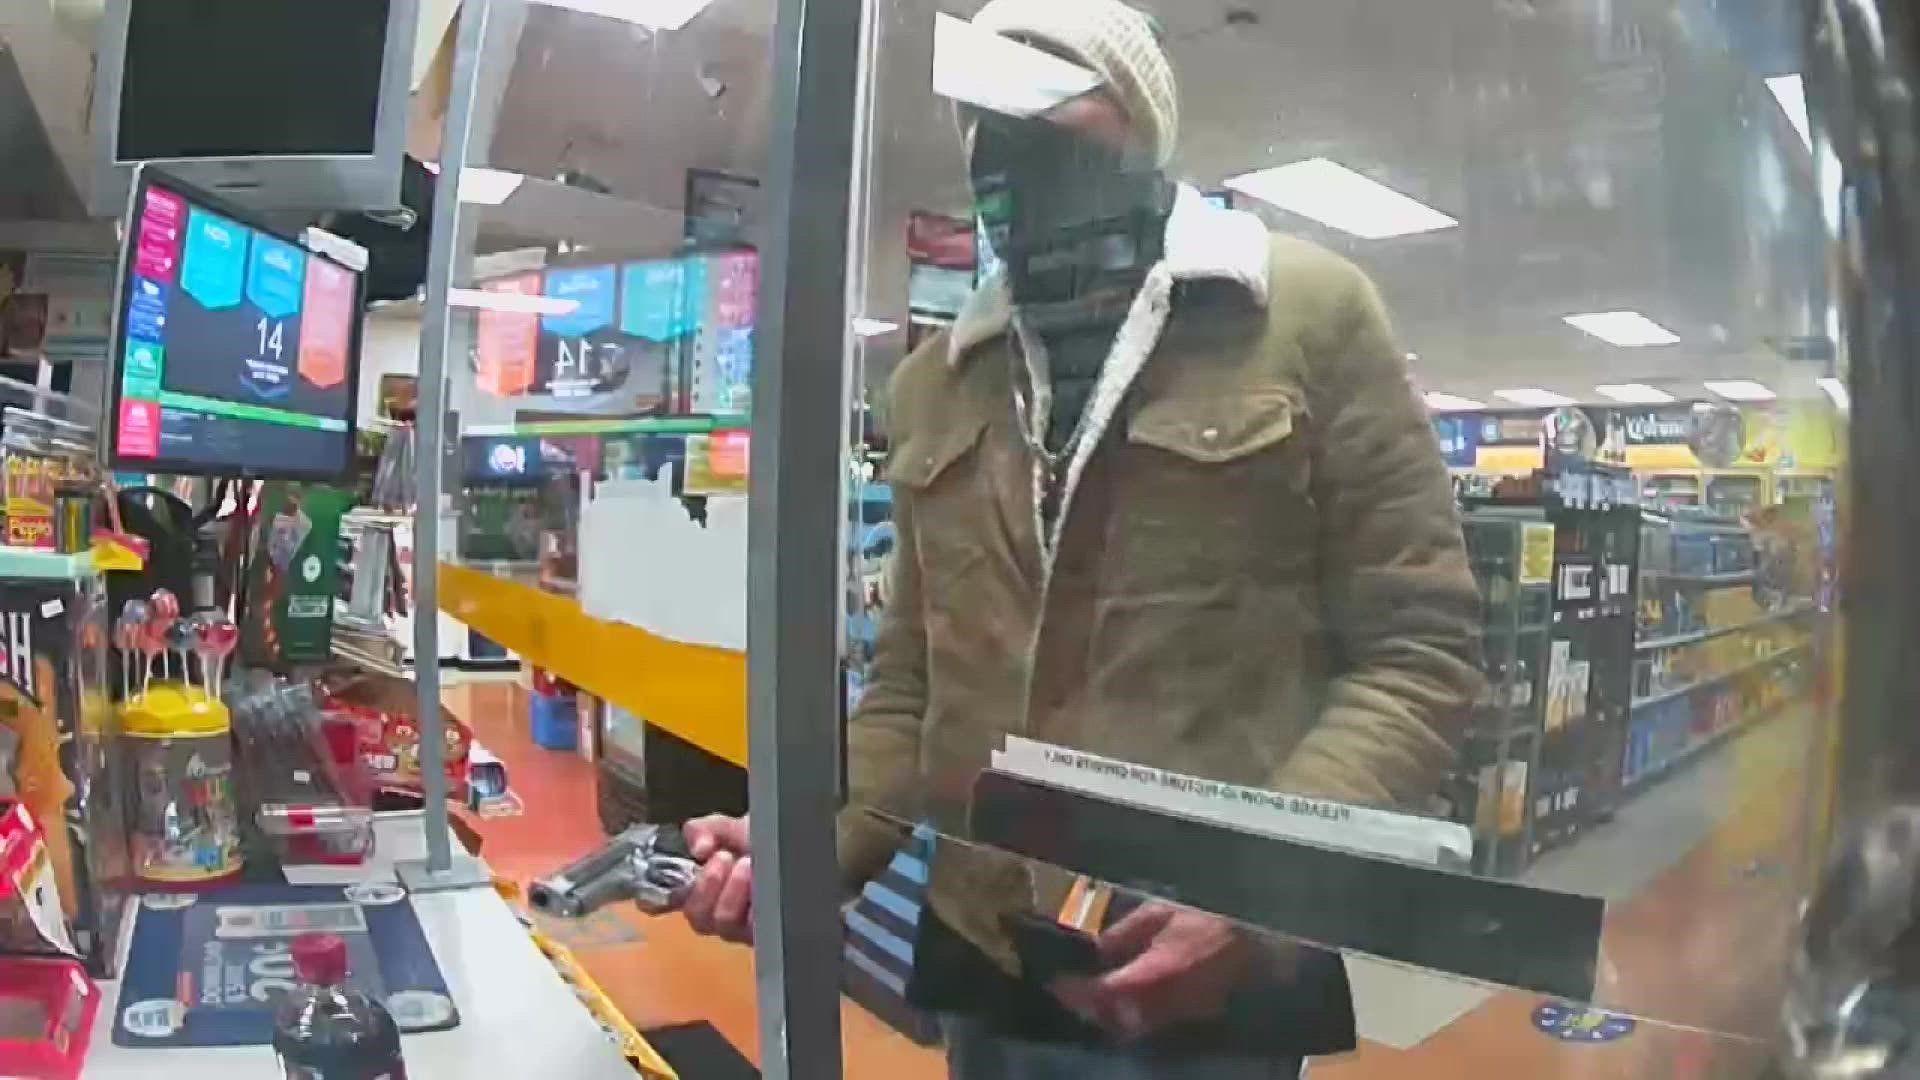 Tacoma police are looking for an armed robber who targeted a convenience store Tuesday night.